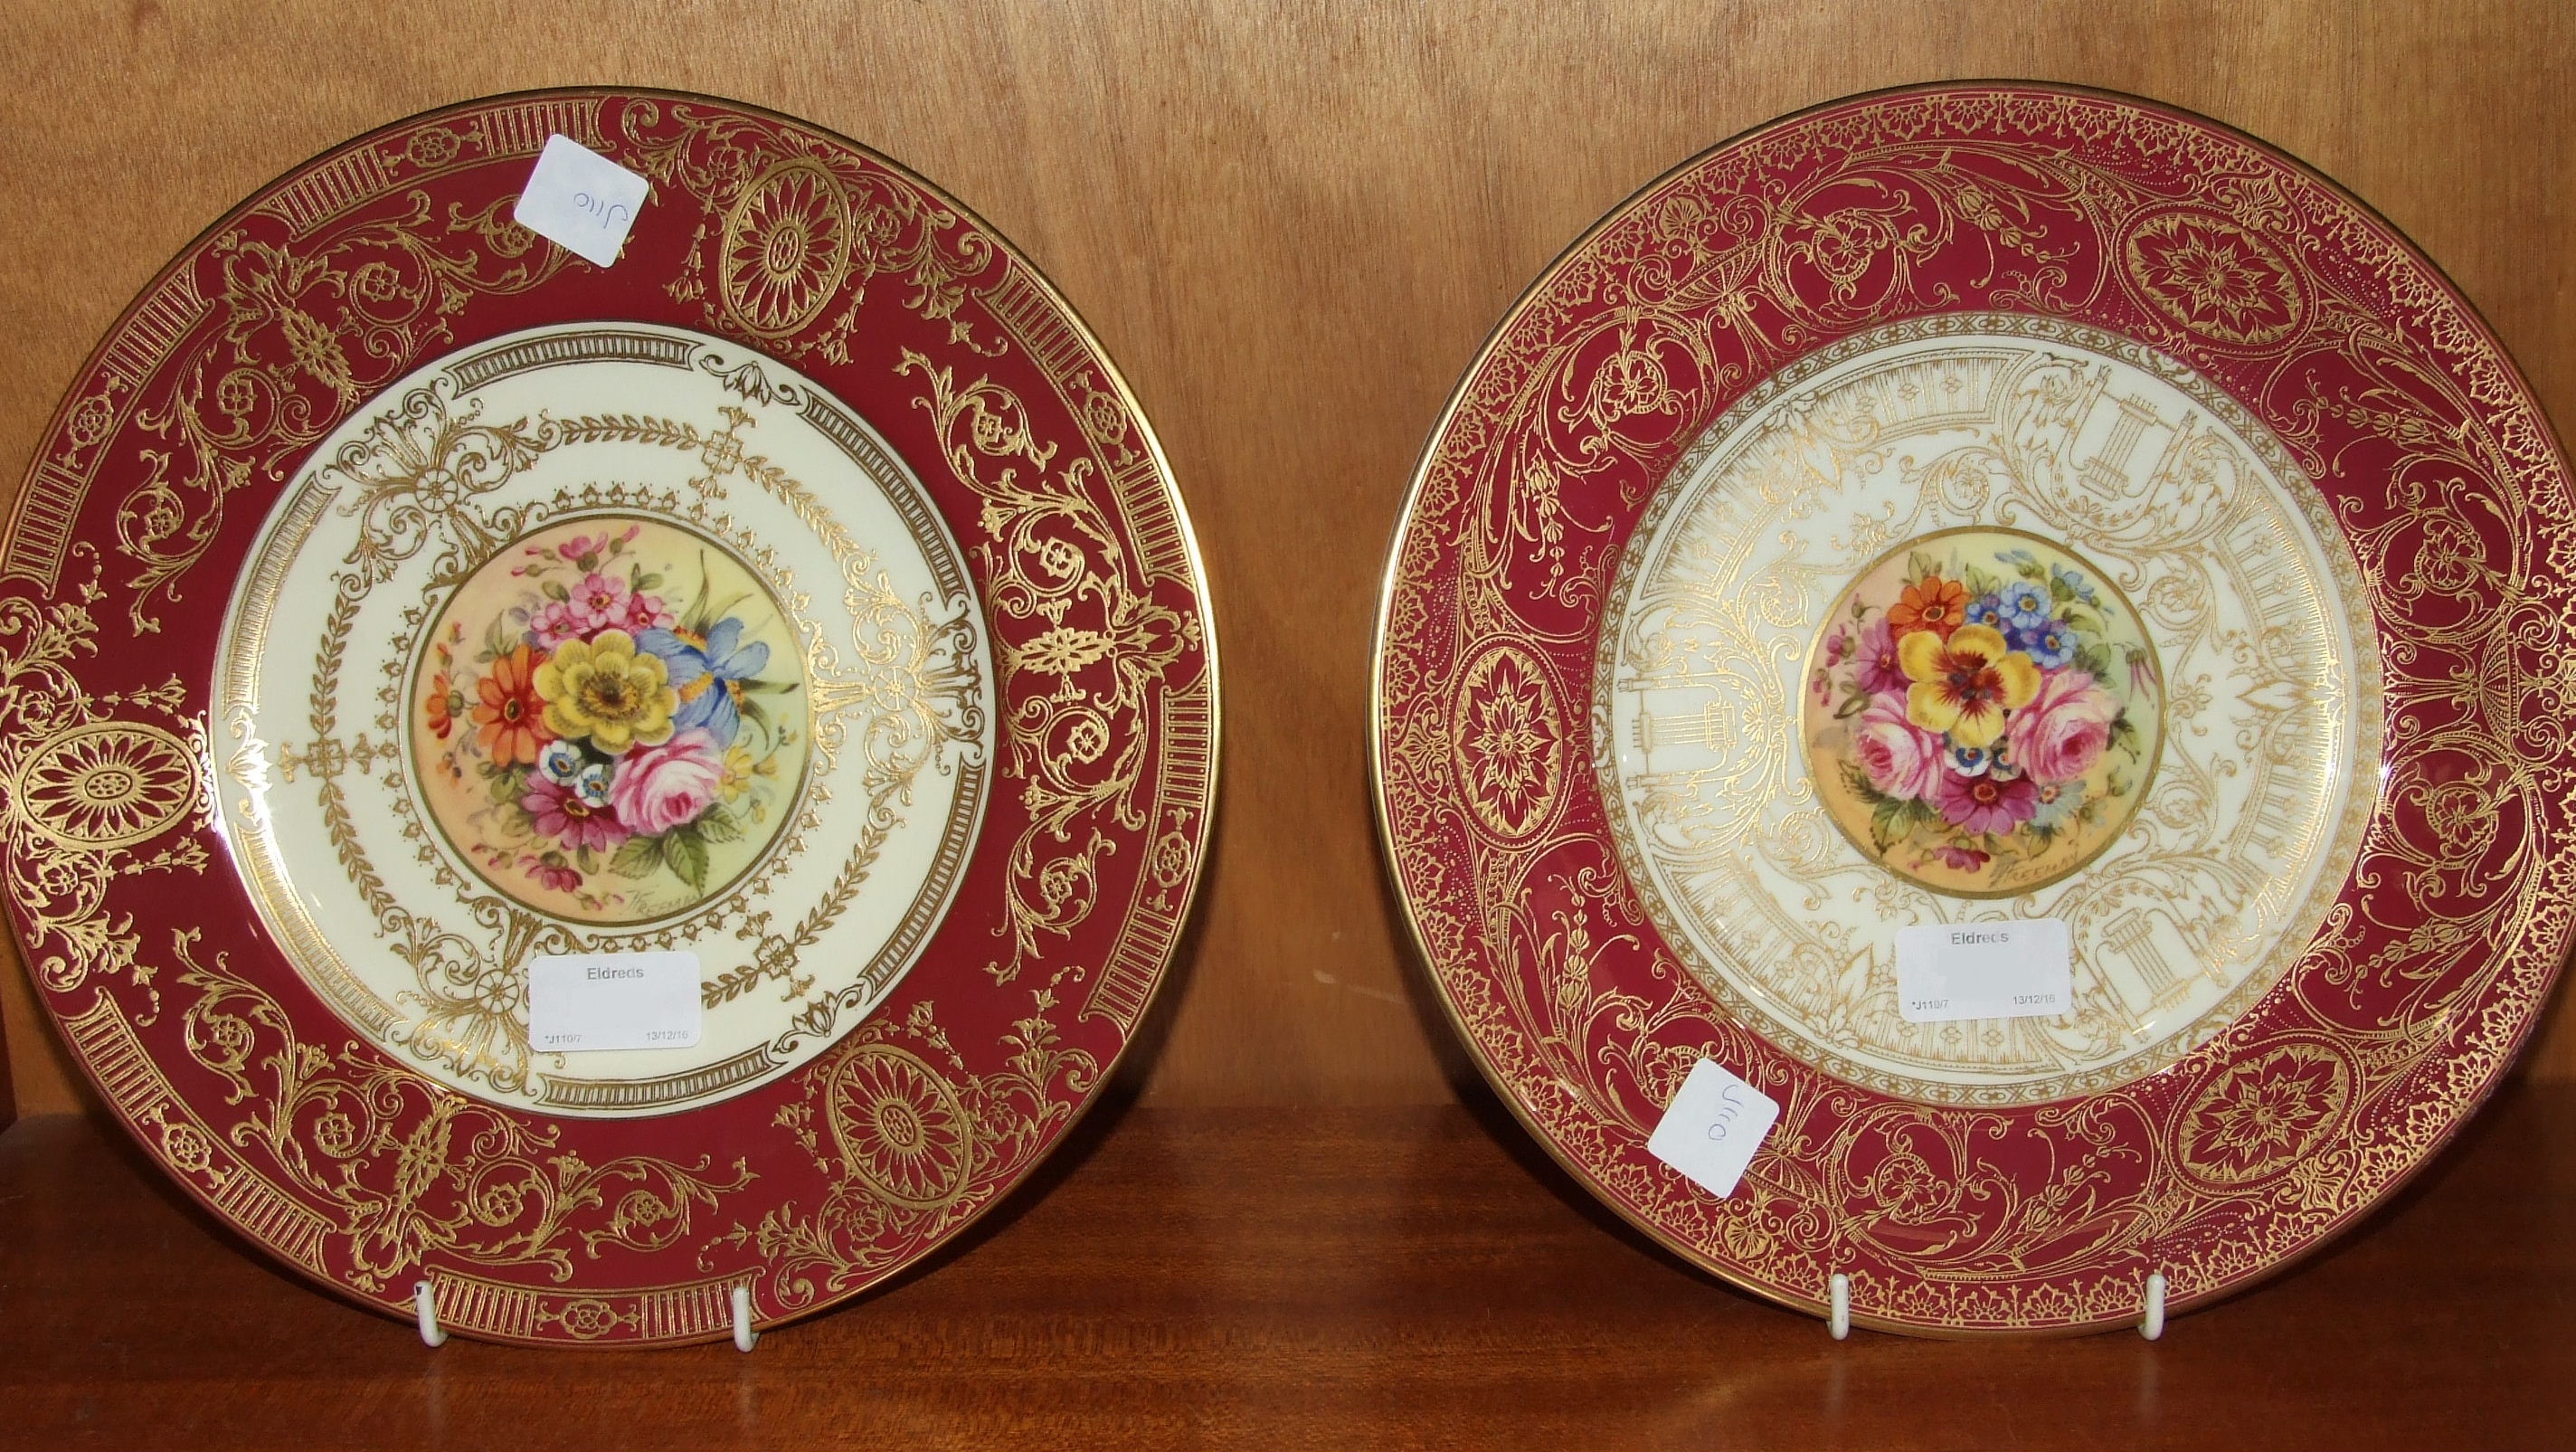 A Royal Worcester cabinet plate by John Freeman painted with circular central panel of flowers